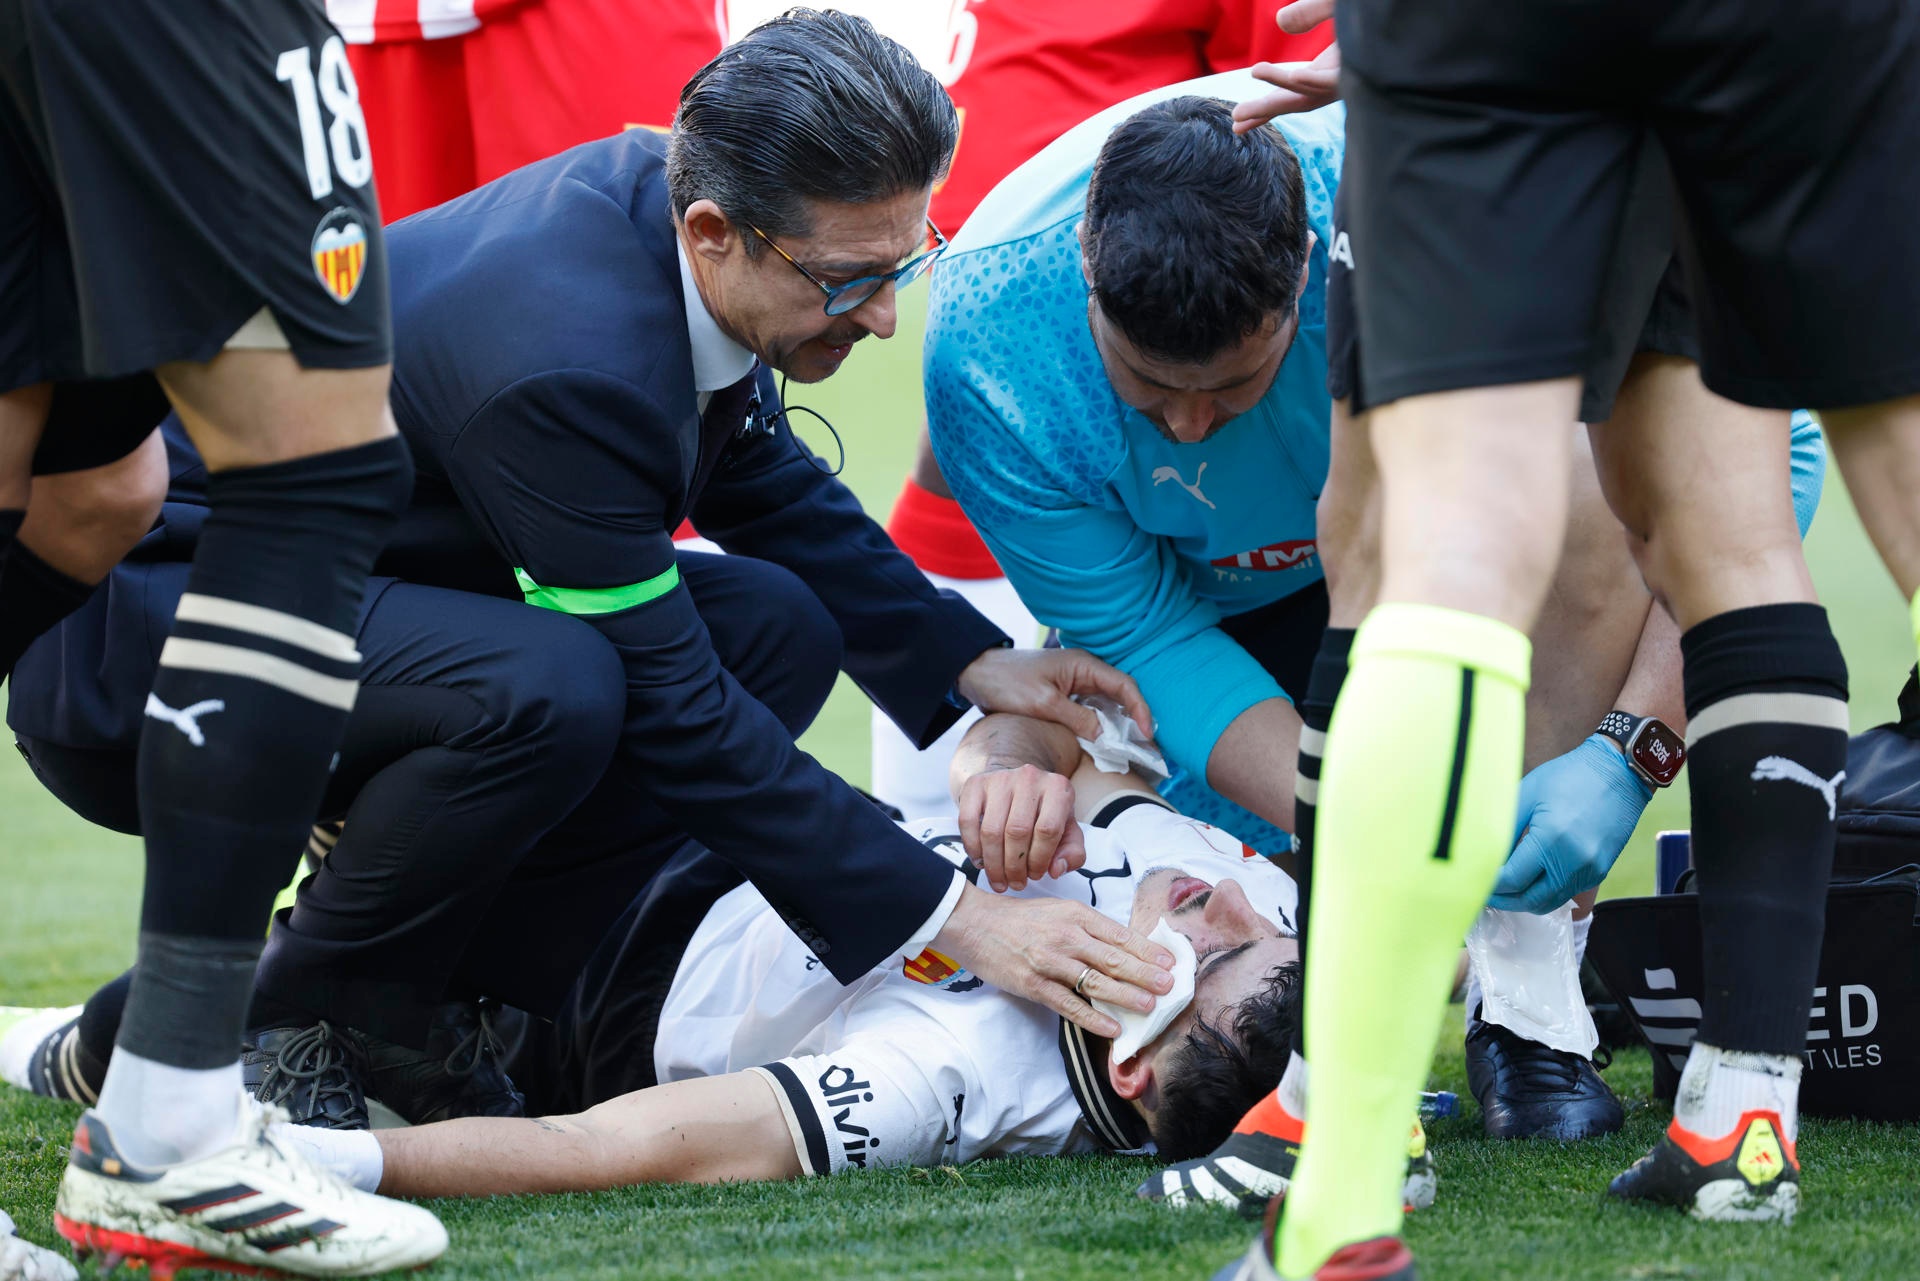 Valencia's Diego Lopez to undergo surgery for facial fracture